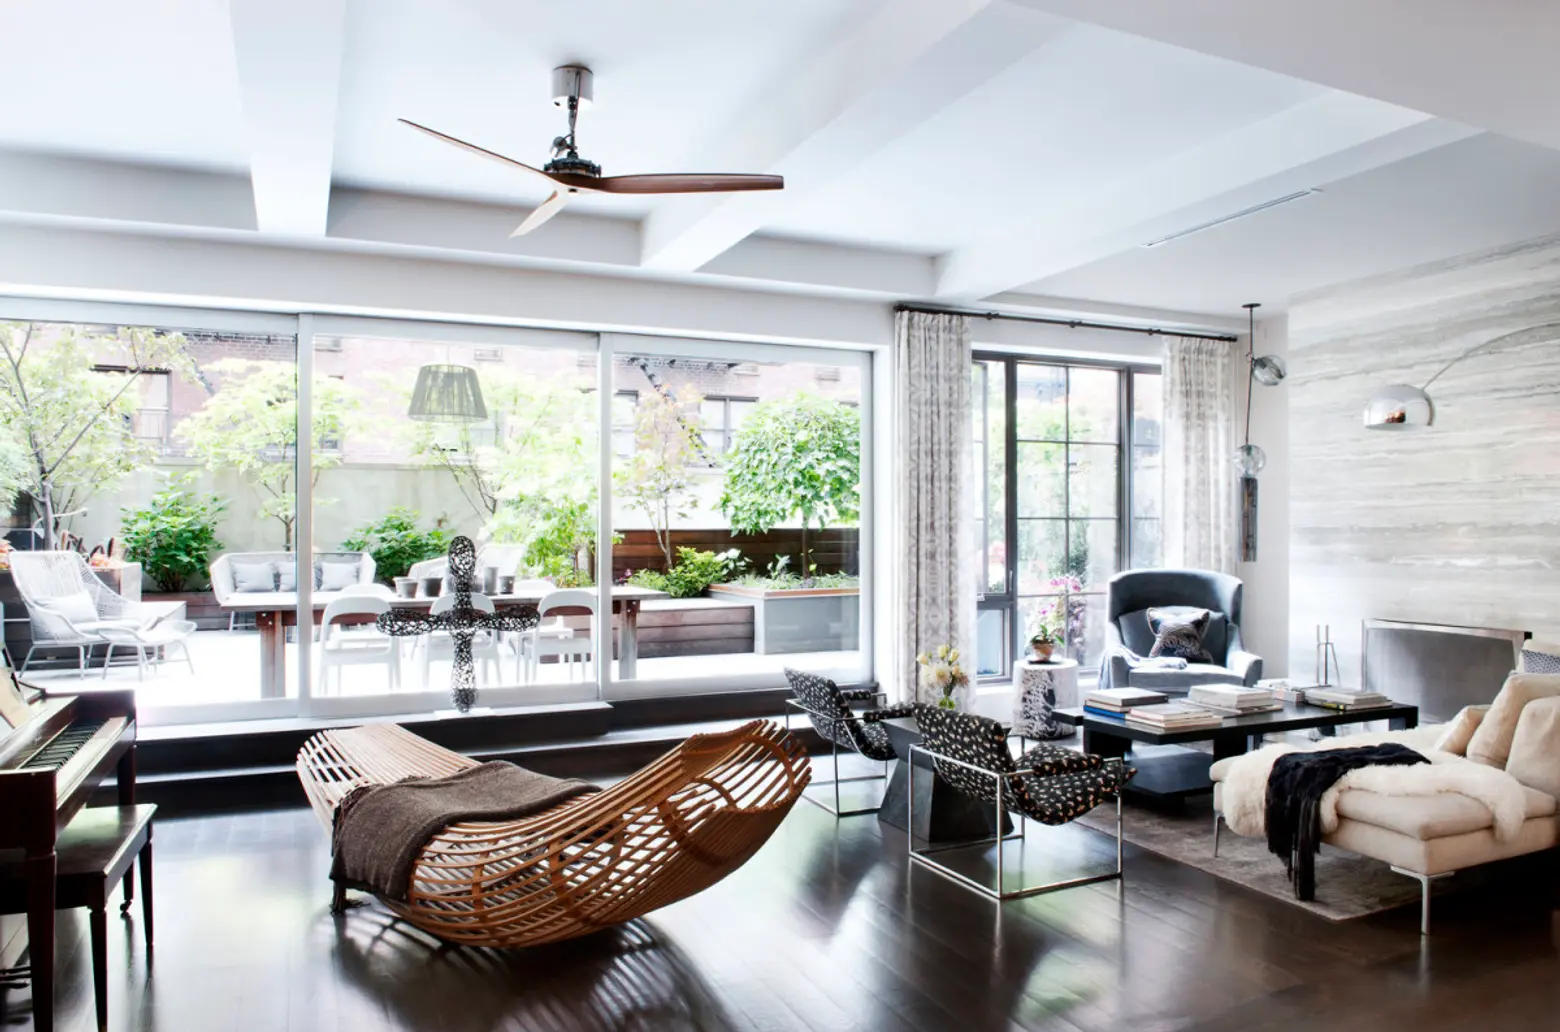 DHD Interiors’ Modern Loft Peacefully Coexists Among Gramercy Park’s 19th Century Homes